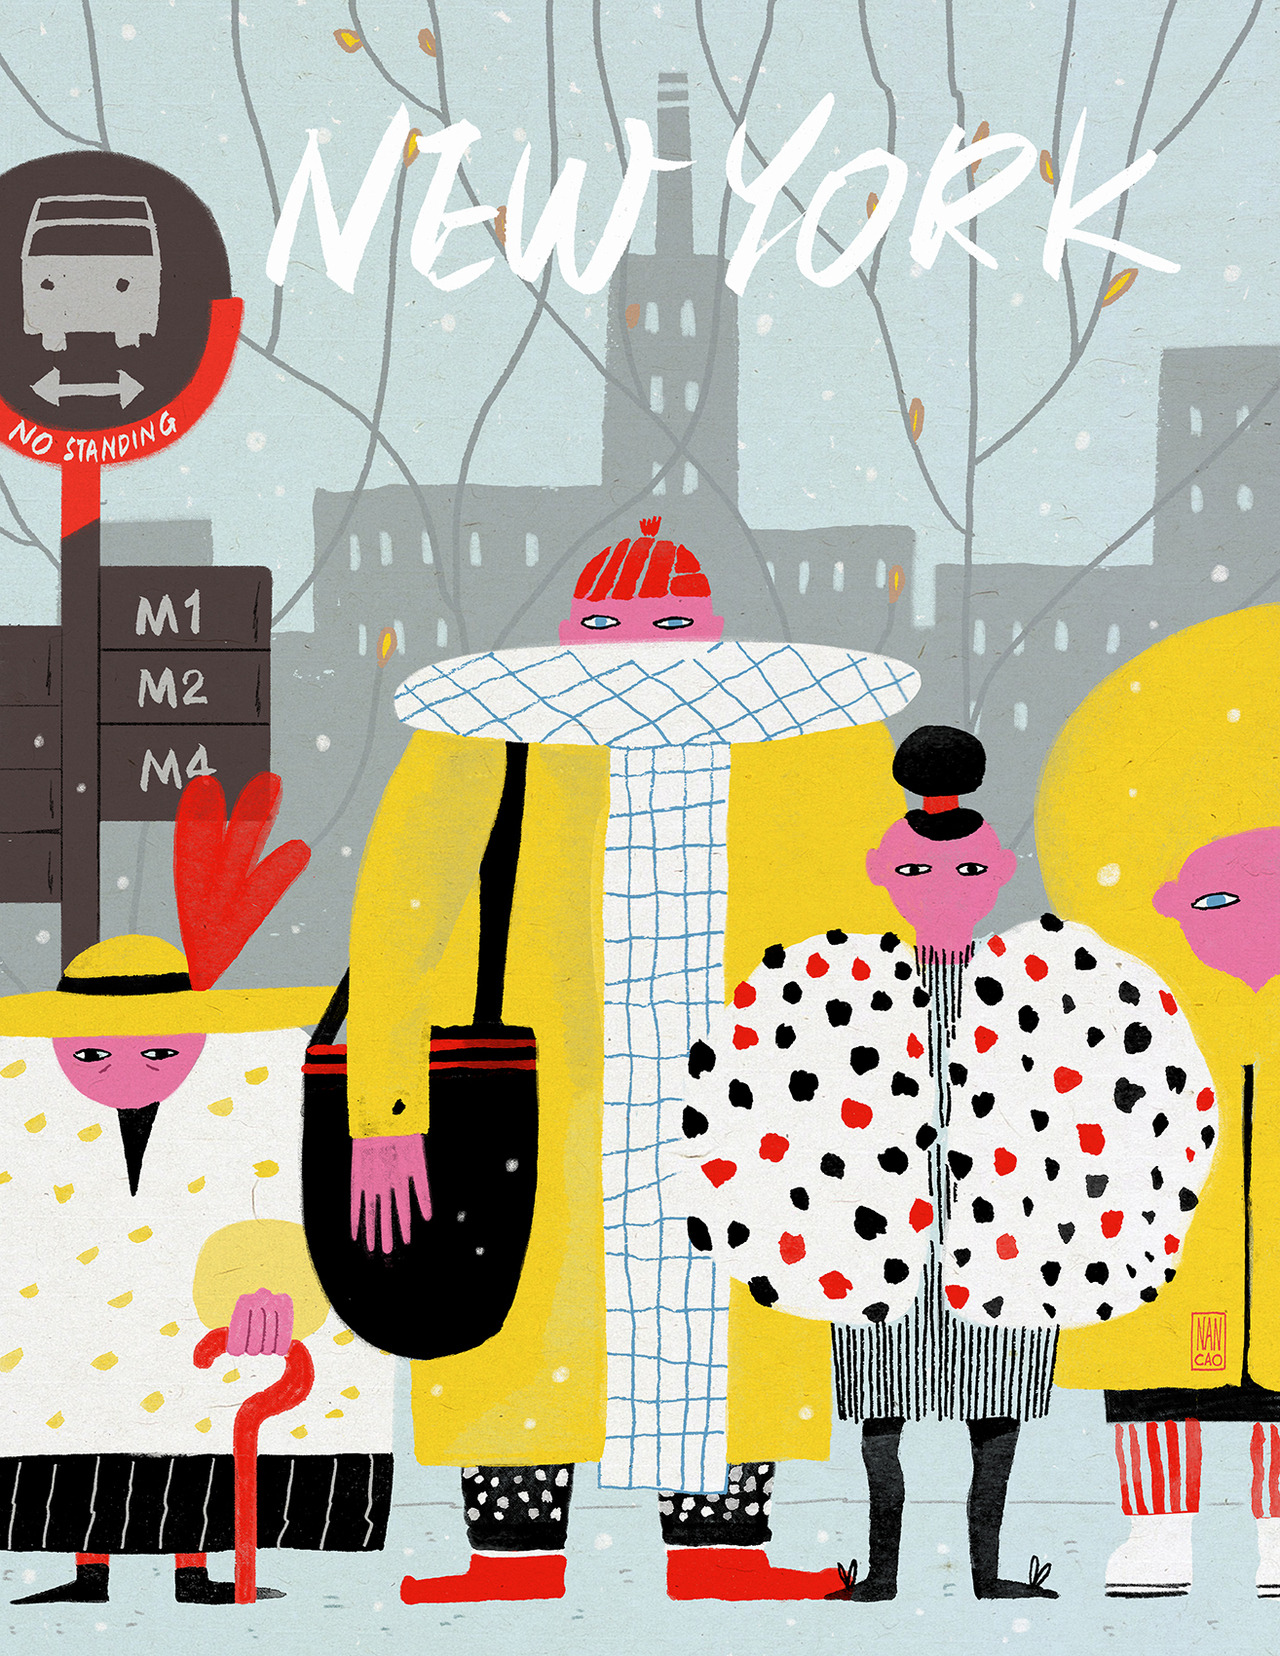 Dear Eat Sleep Draw team, I have been following Eat Sleep Draw’s lovely posts for a long time and I really like the stories and artwork you are featuring. My name is Nan Cao and I am a freelance illustrator living in New York. I am reaching out to...